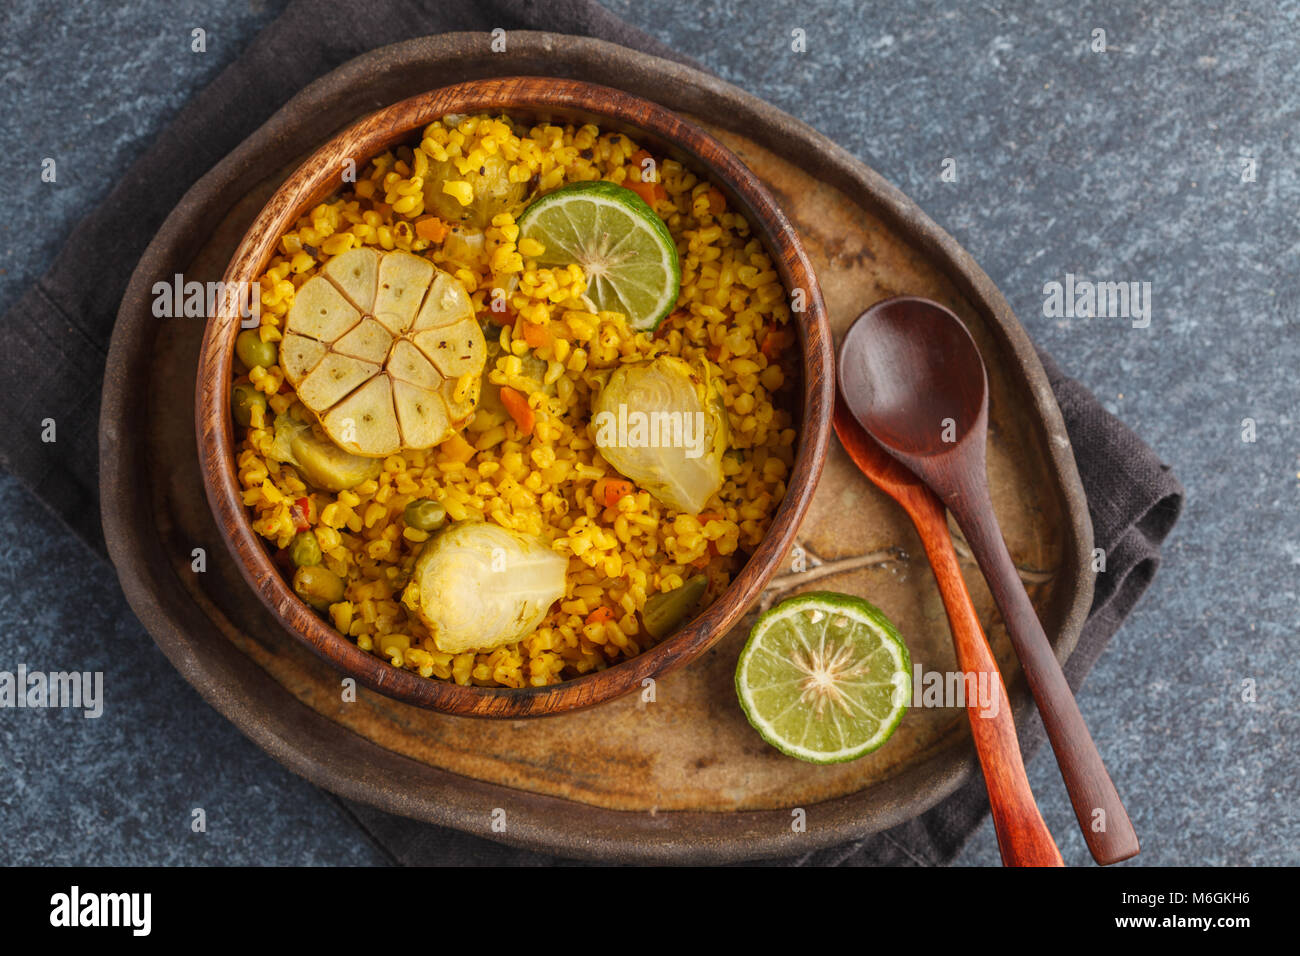 Curry bulgur with vegetables in a wooden bowl. Dark background, vegan meal concept. Stock Photo